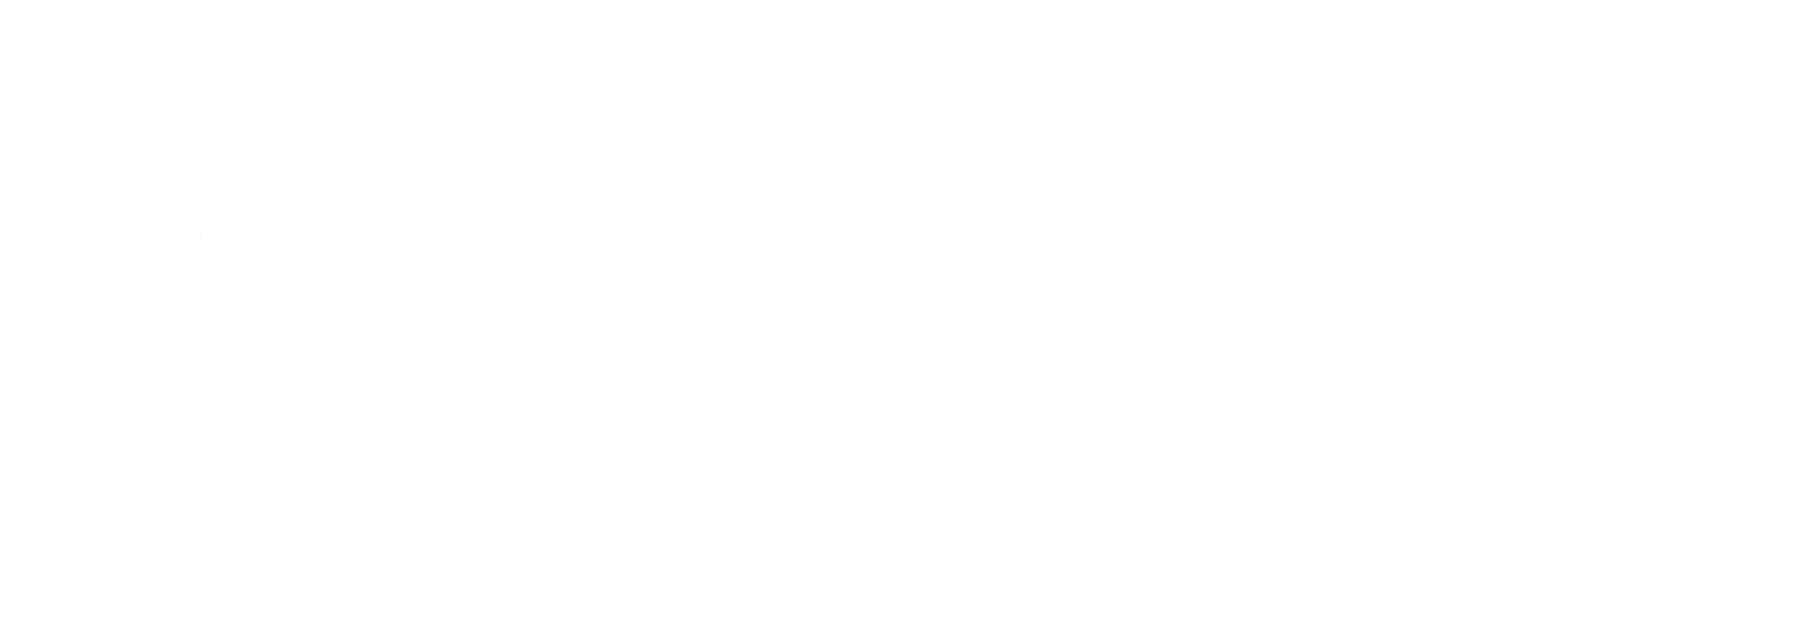 Answer Financial